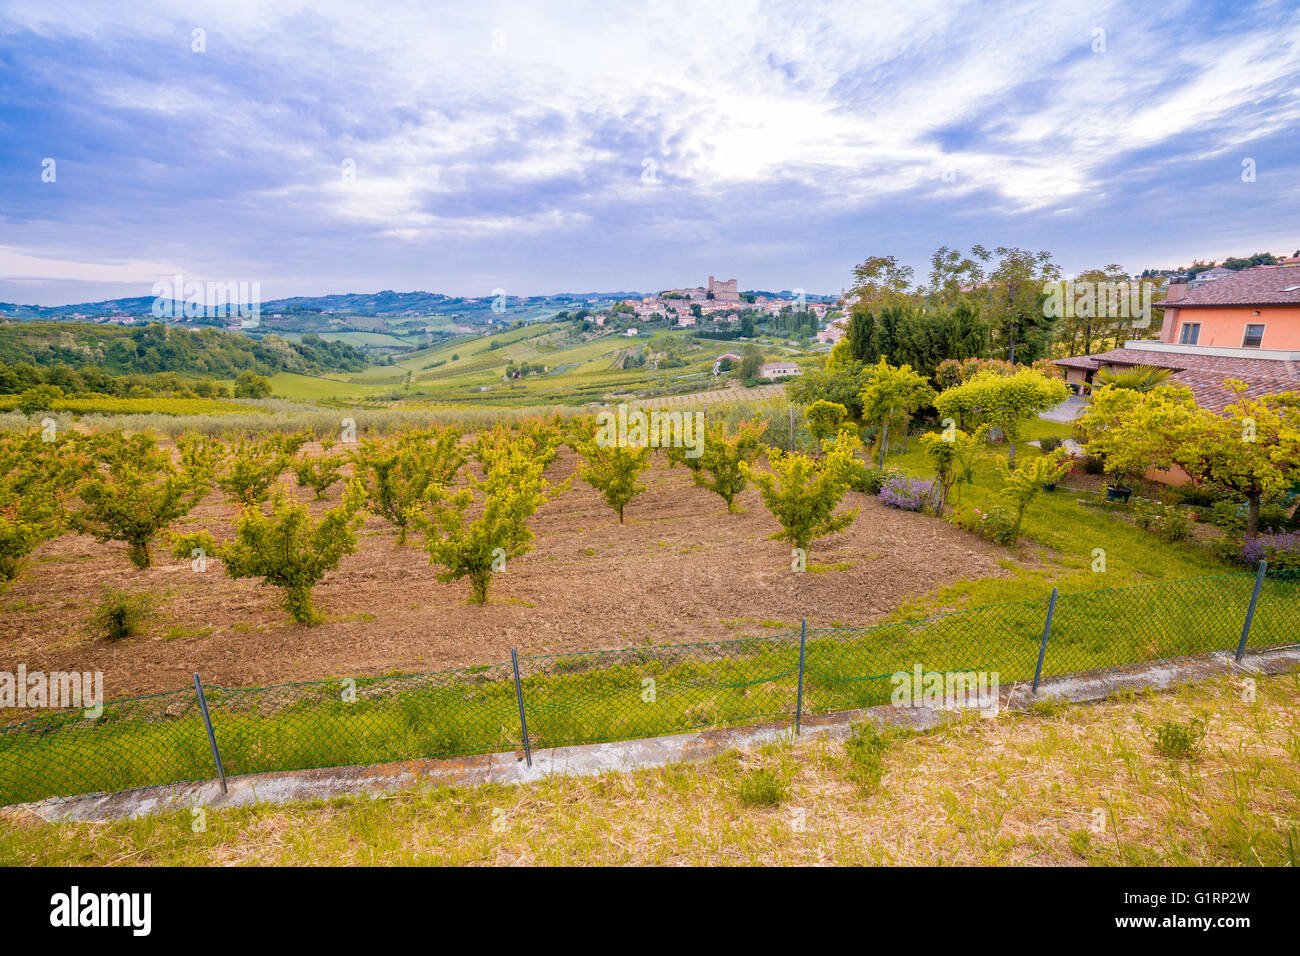 panorama of cultivated fields on the hills of Emilia Romagna dominated by Malatestian Castle, medieval fortress dating back to 1200 AD, of Longiano, Italy Stock Photo